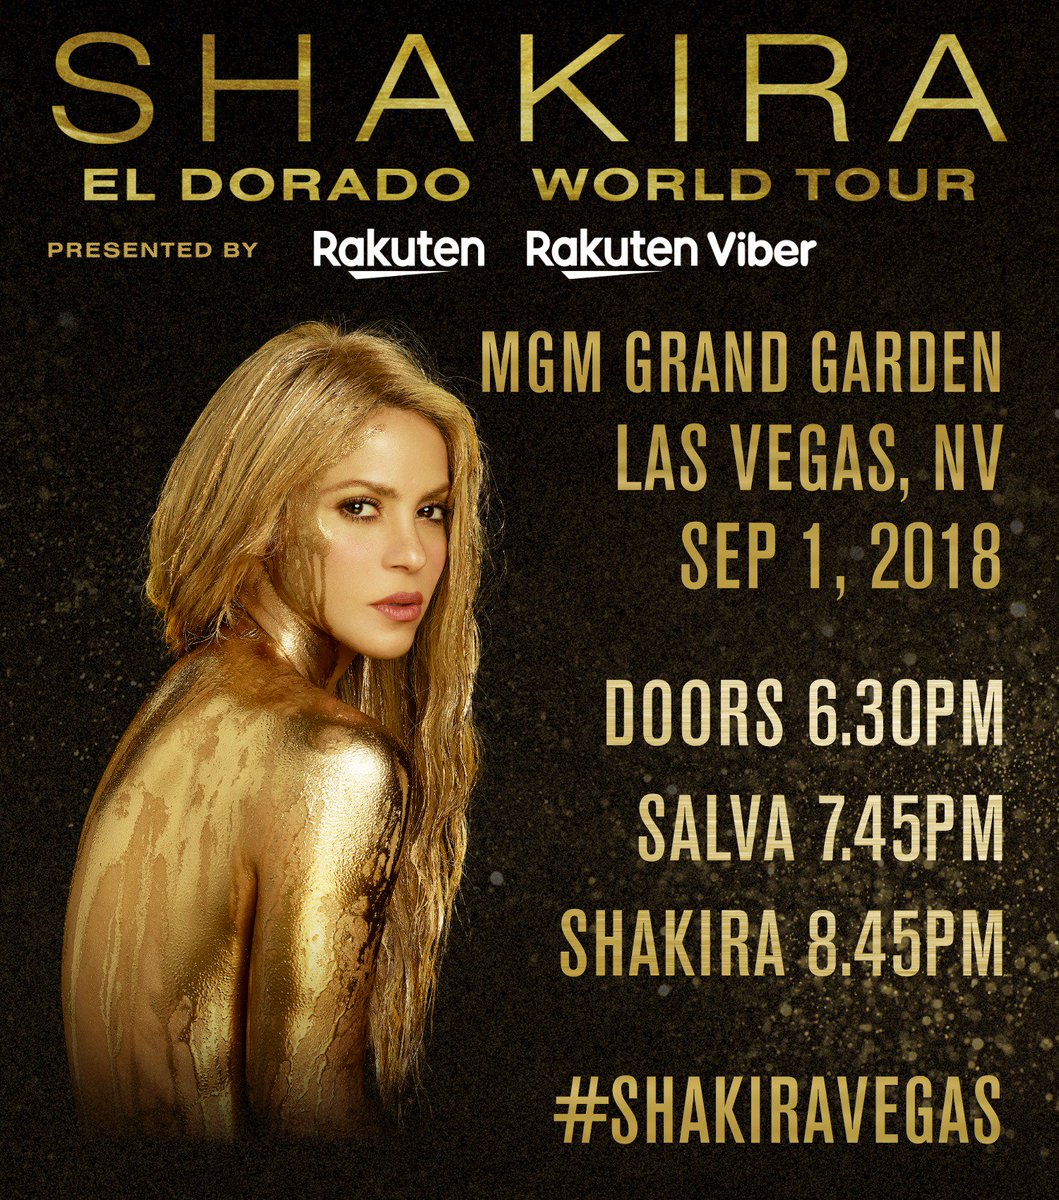 Hello Las Vegas! Here are the times for tonight's #ShakiraVegas show at @MGMGrand. ShakHQ https://t.co/AFux4SNj8z